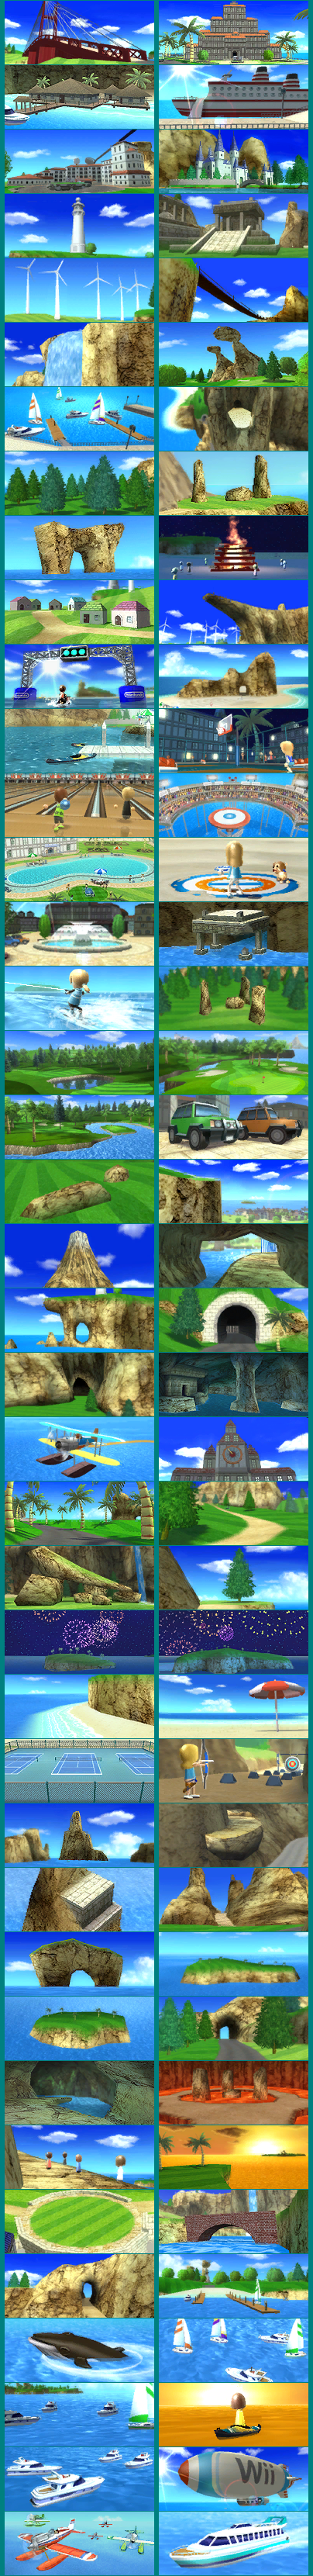 Wii Sports Resort - i Point Location Images